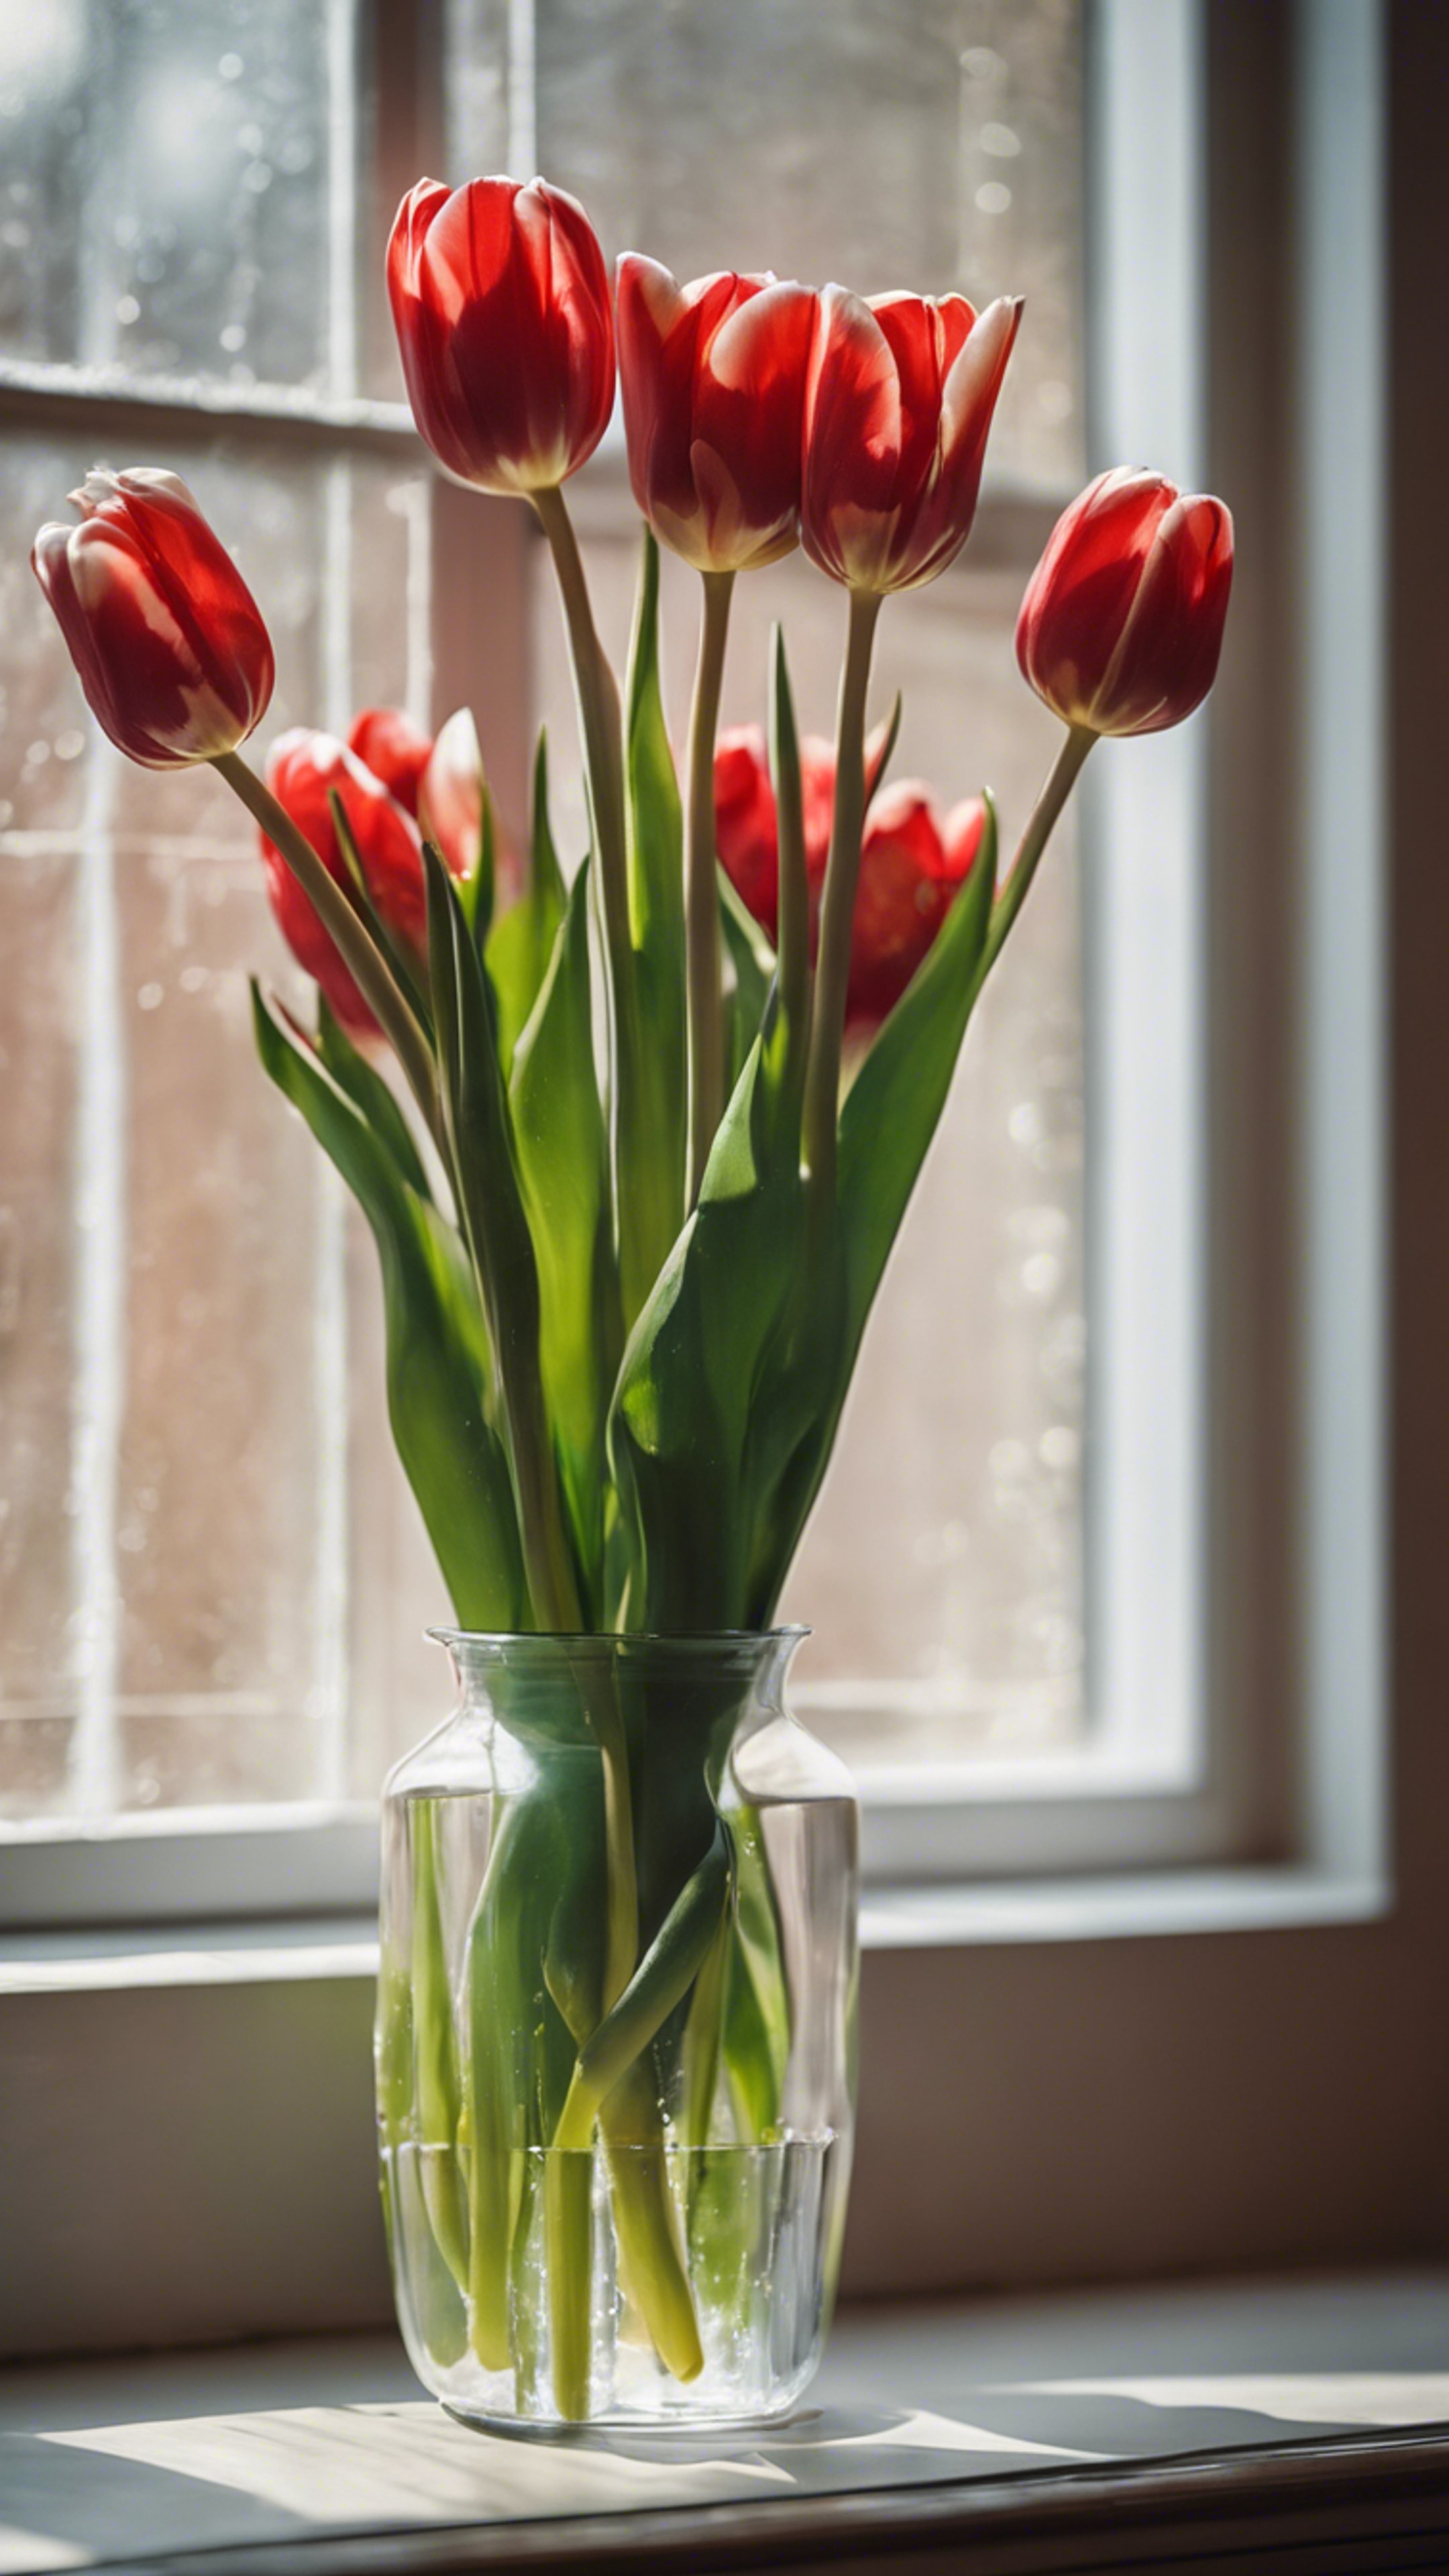 A bunch of vivid red and white tulips in a glass vase, lit by natural light. 牆紙[fc69acd6917c413b913f]